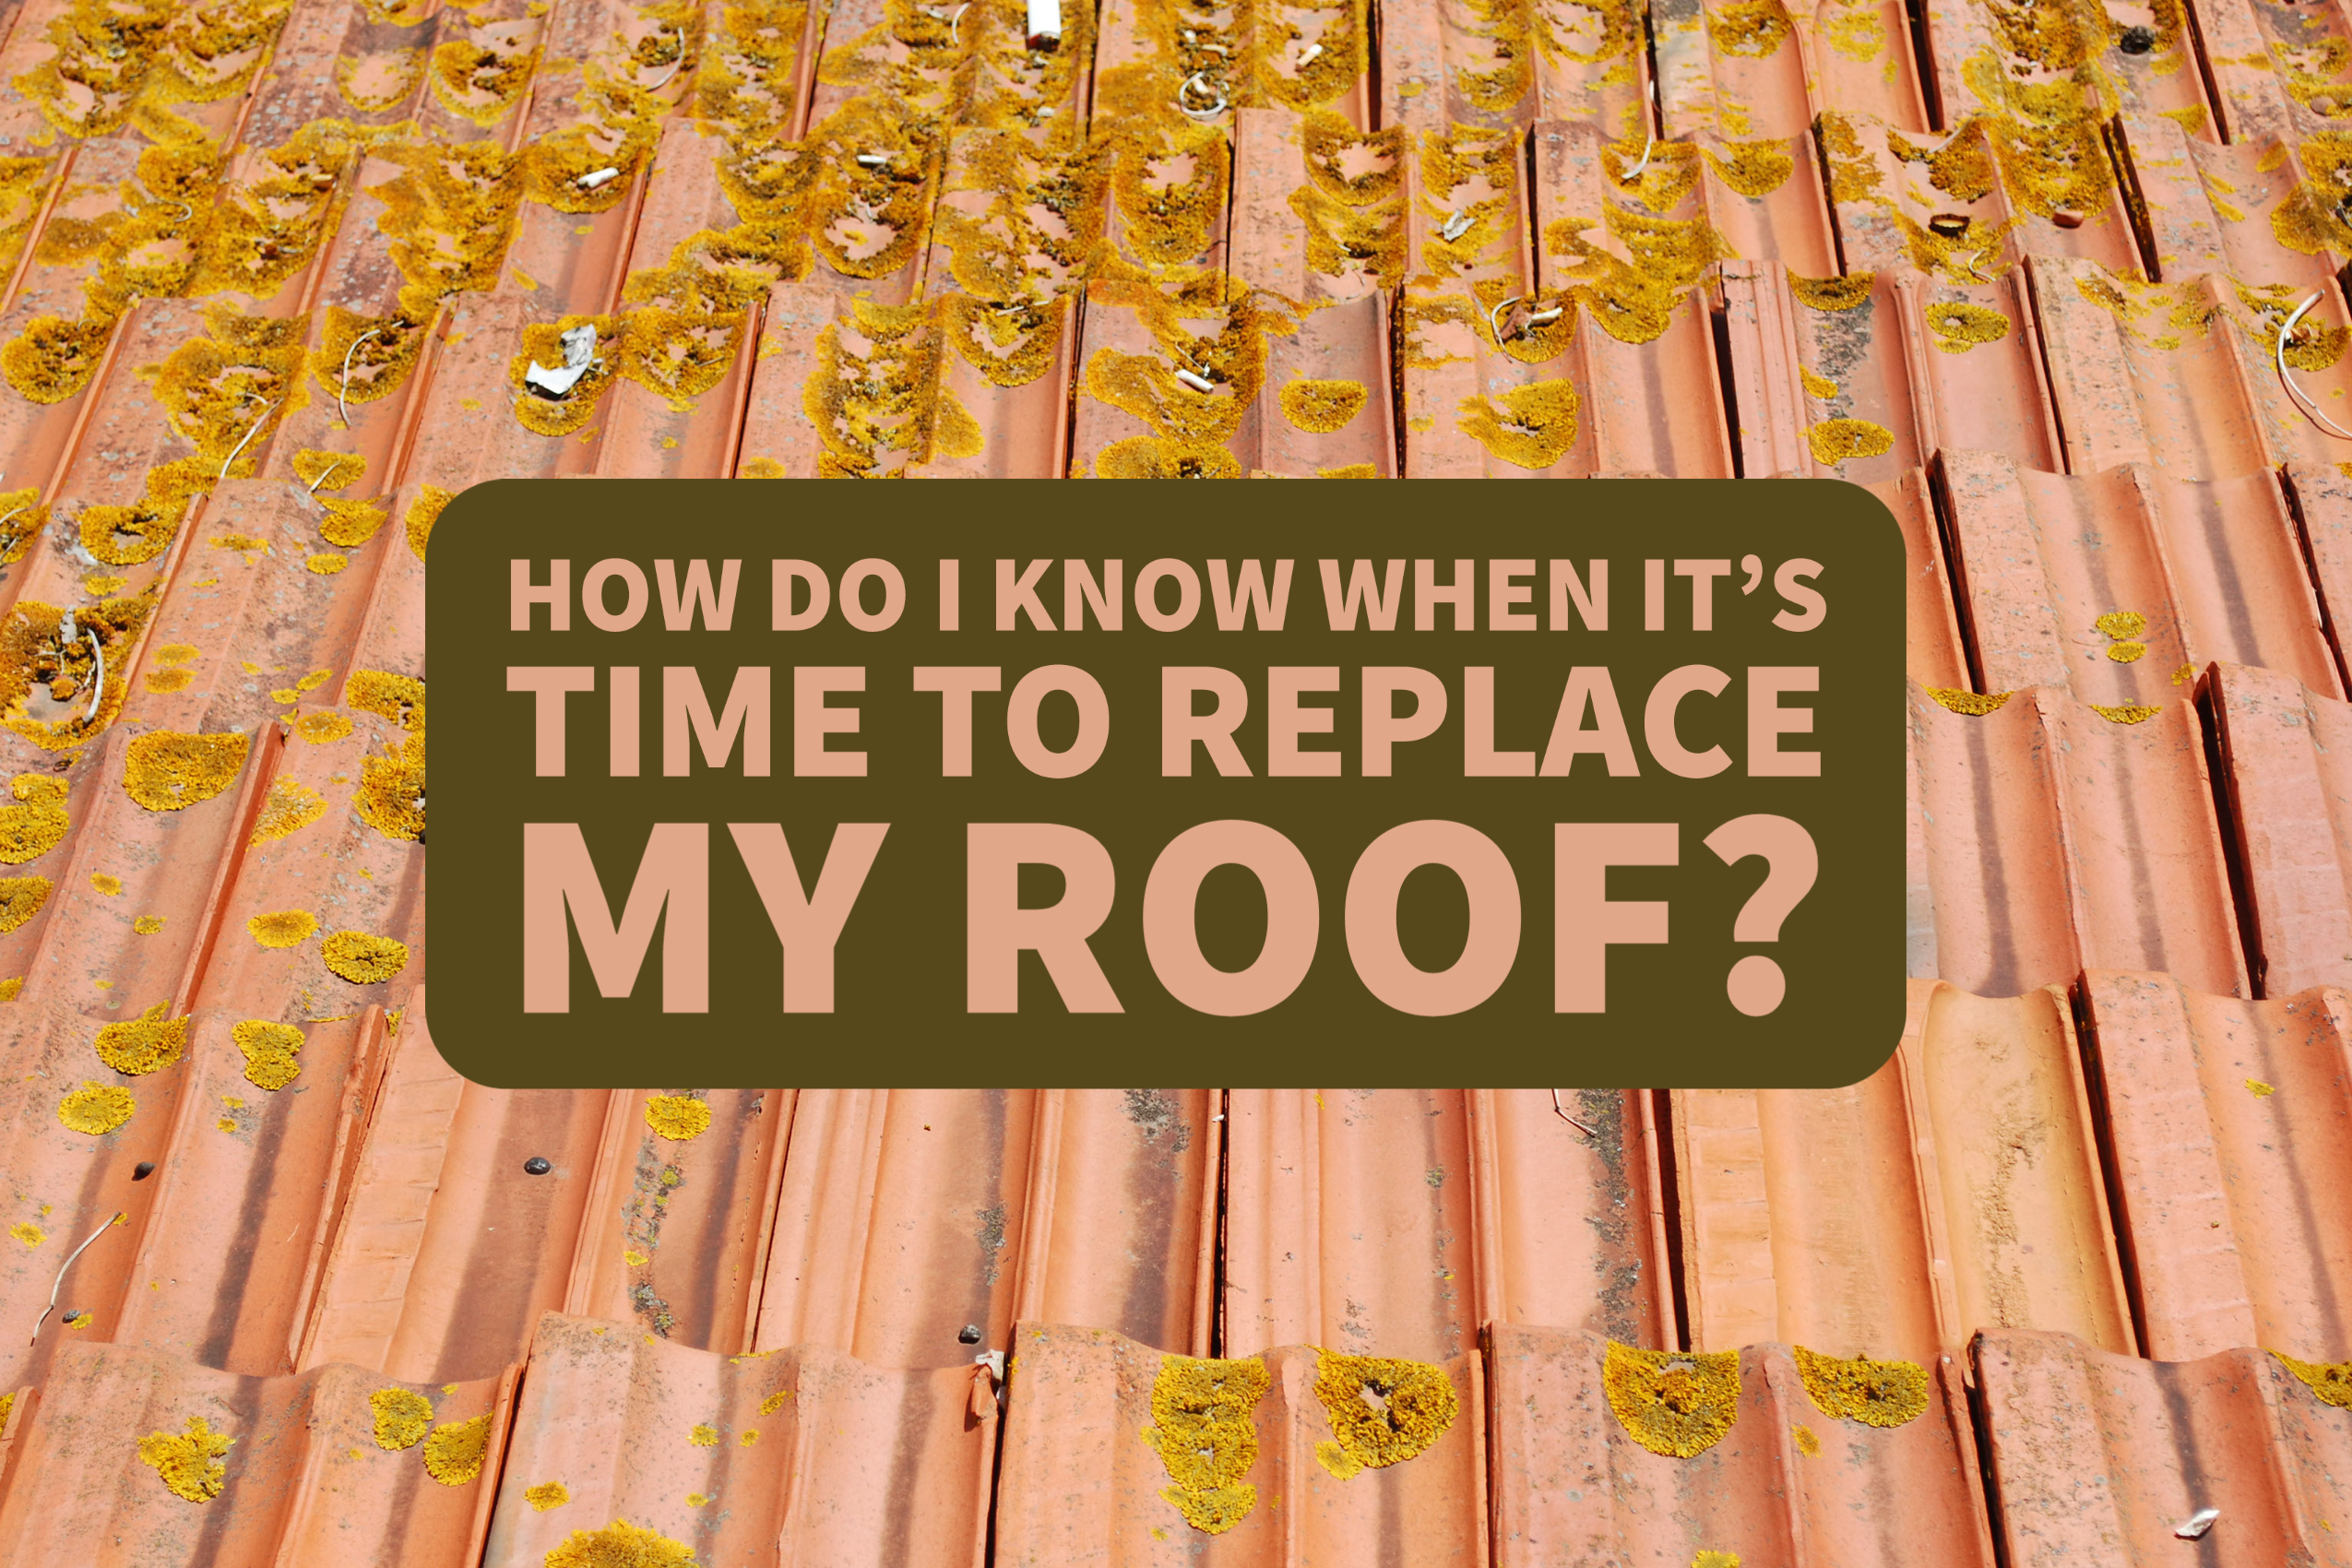 How Do I Know When It’s Time to Replace My Roof?